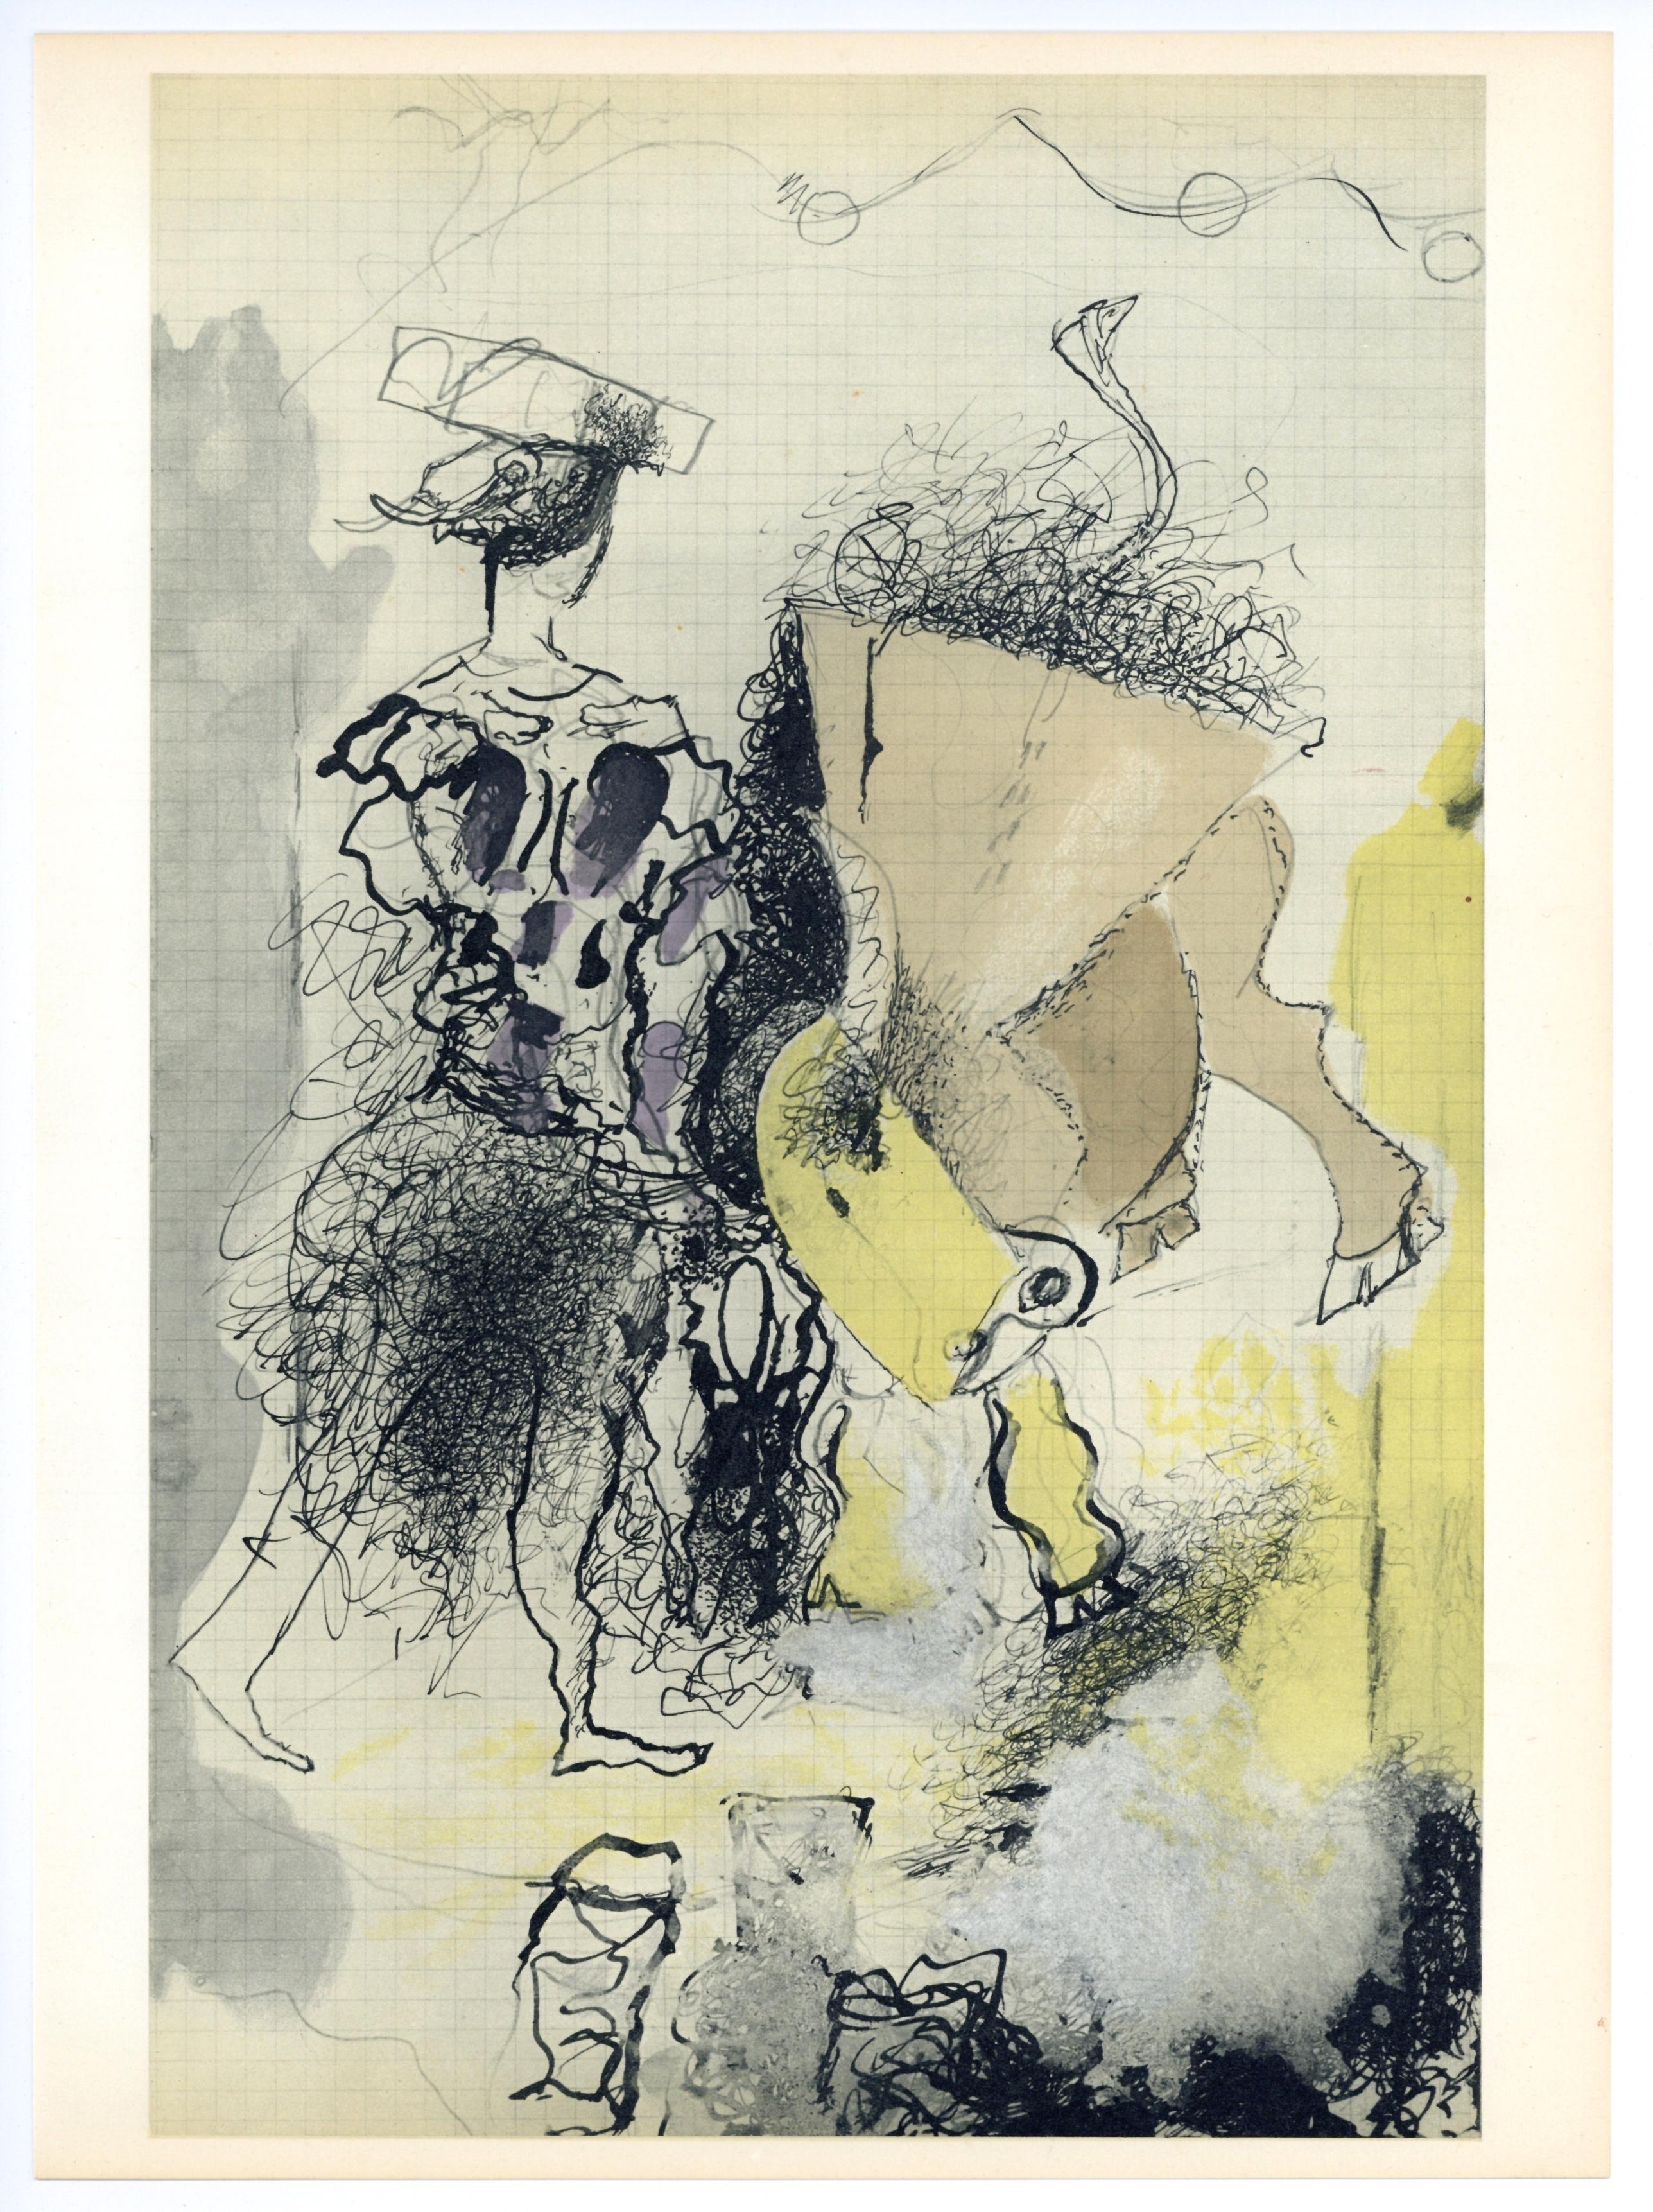 Carnet Intimes - Print by (after) Georges Braque